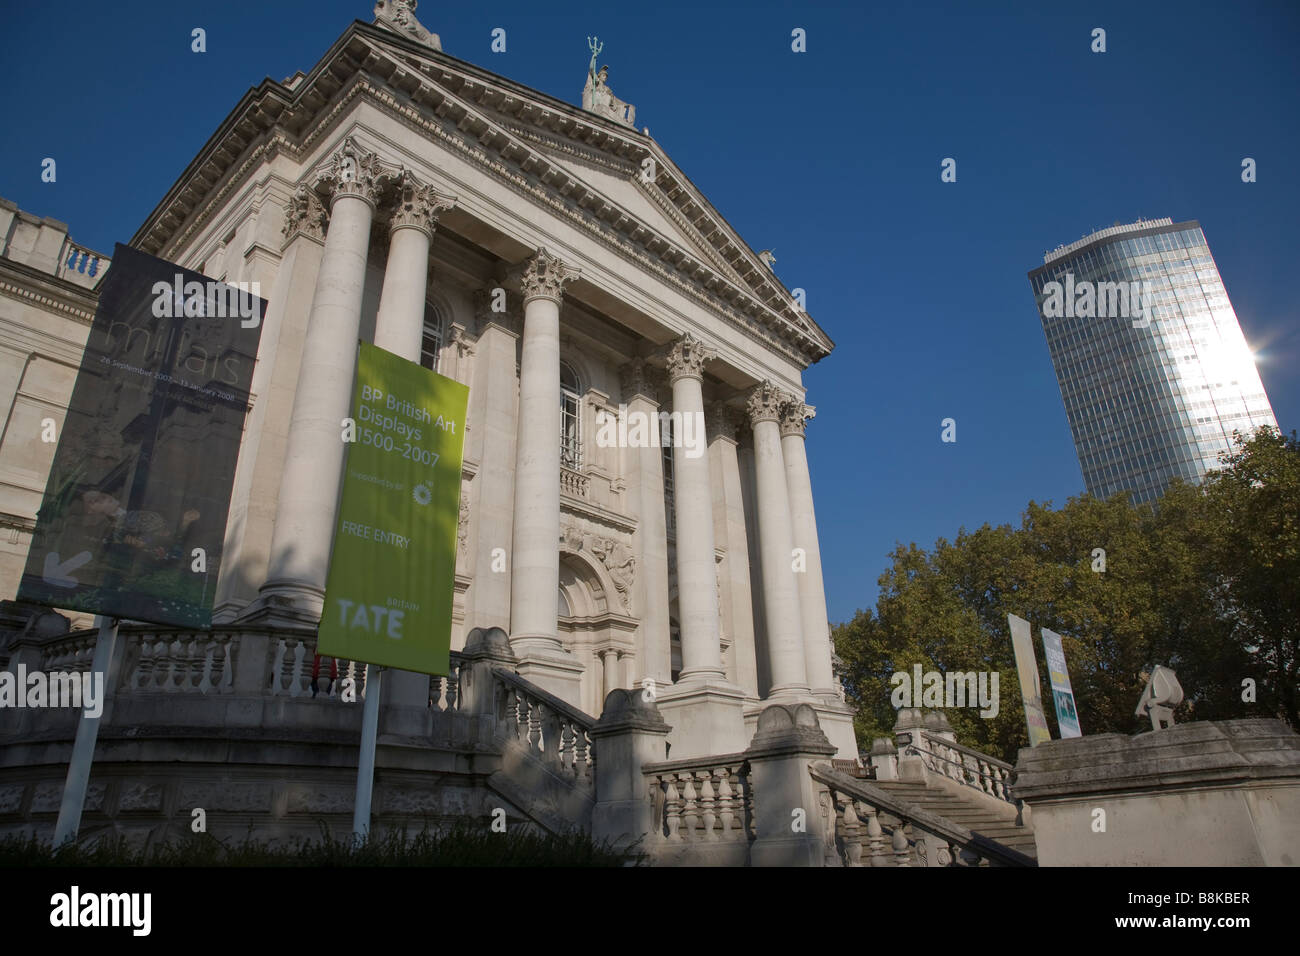 Front entrance and steps of the Tate Gallery, London, England. Stock Photo